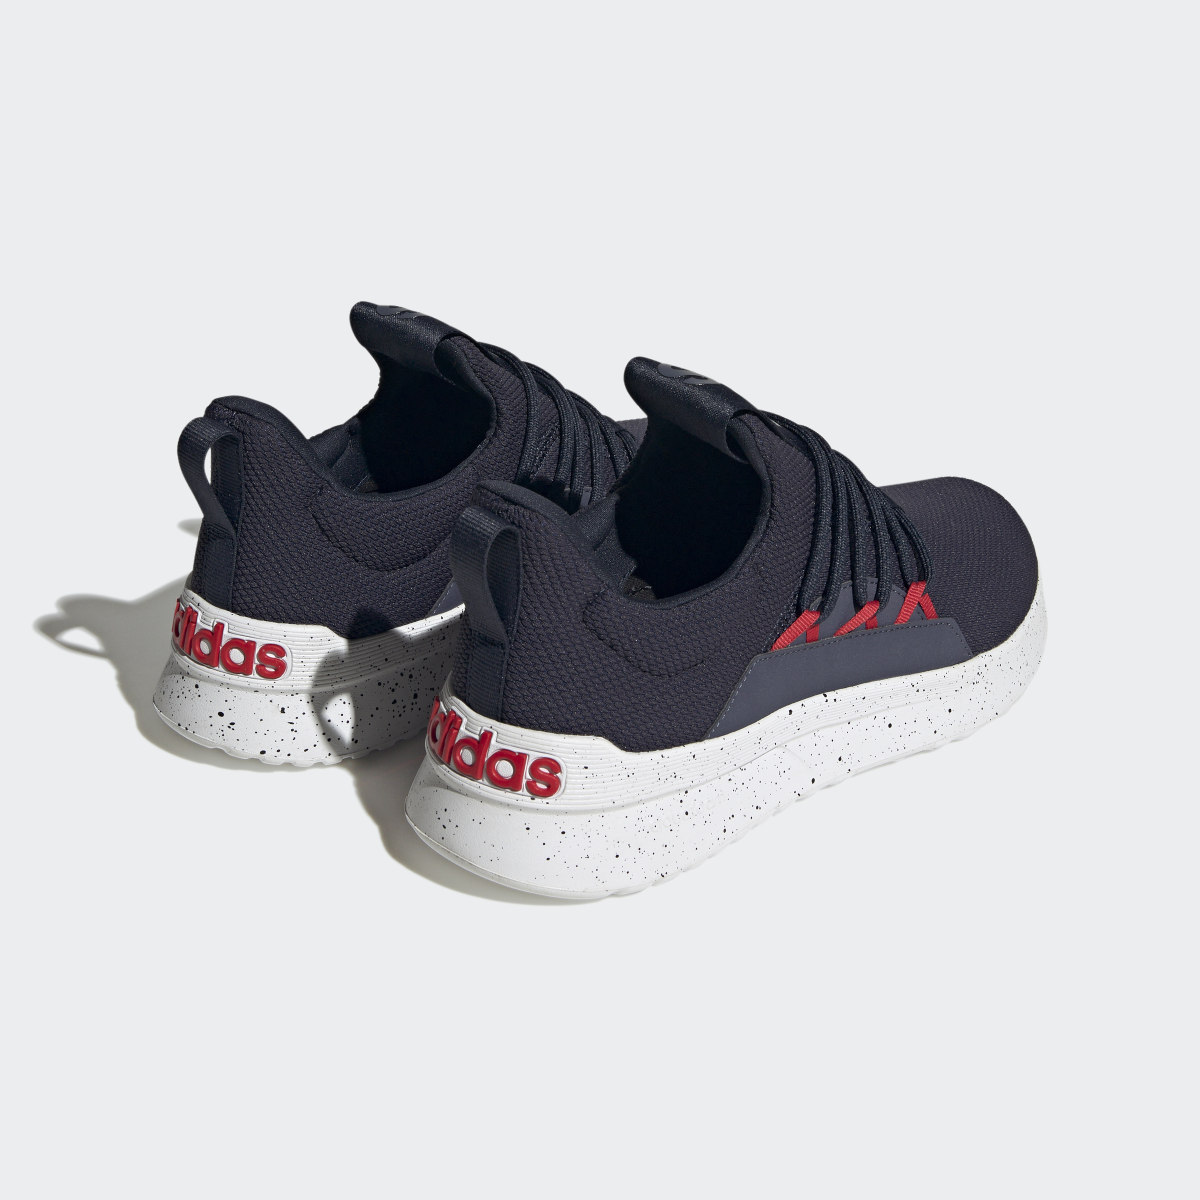 Adidas Lite Racer Adapt 5.0 Shoes. 6